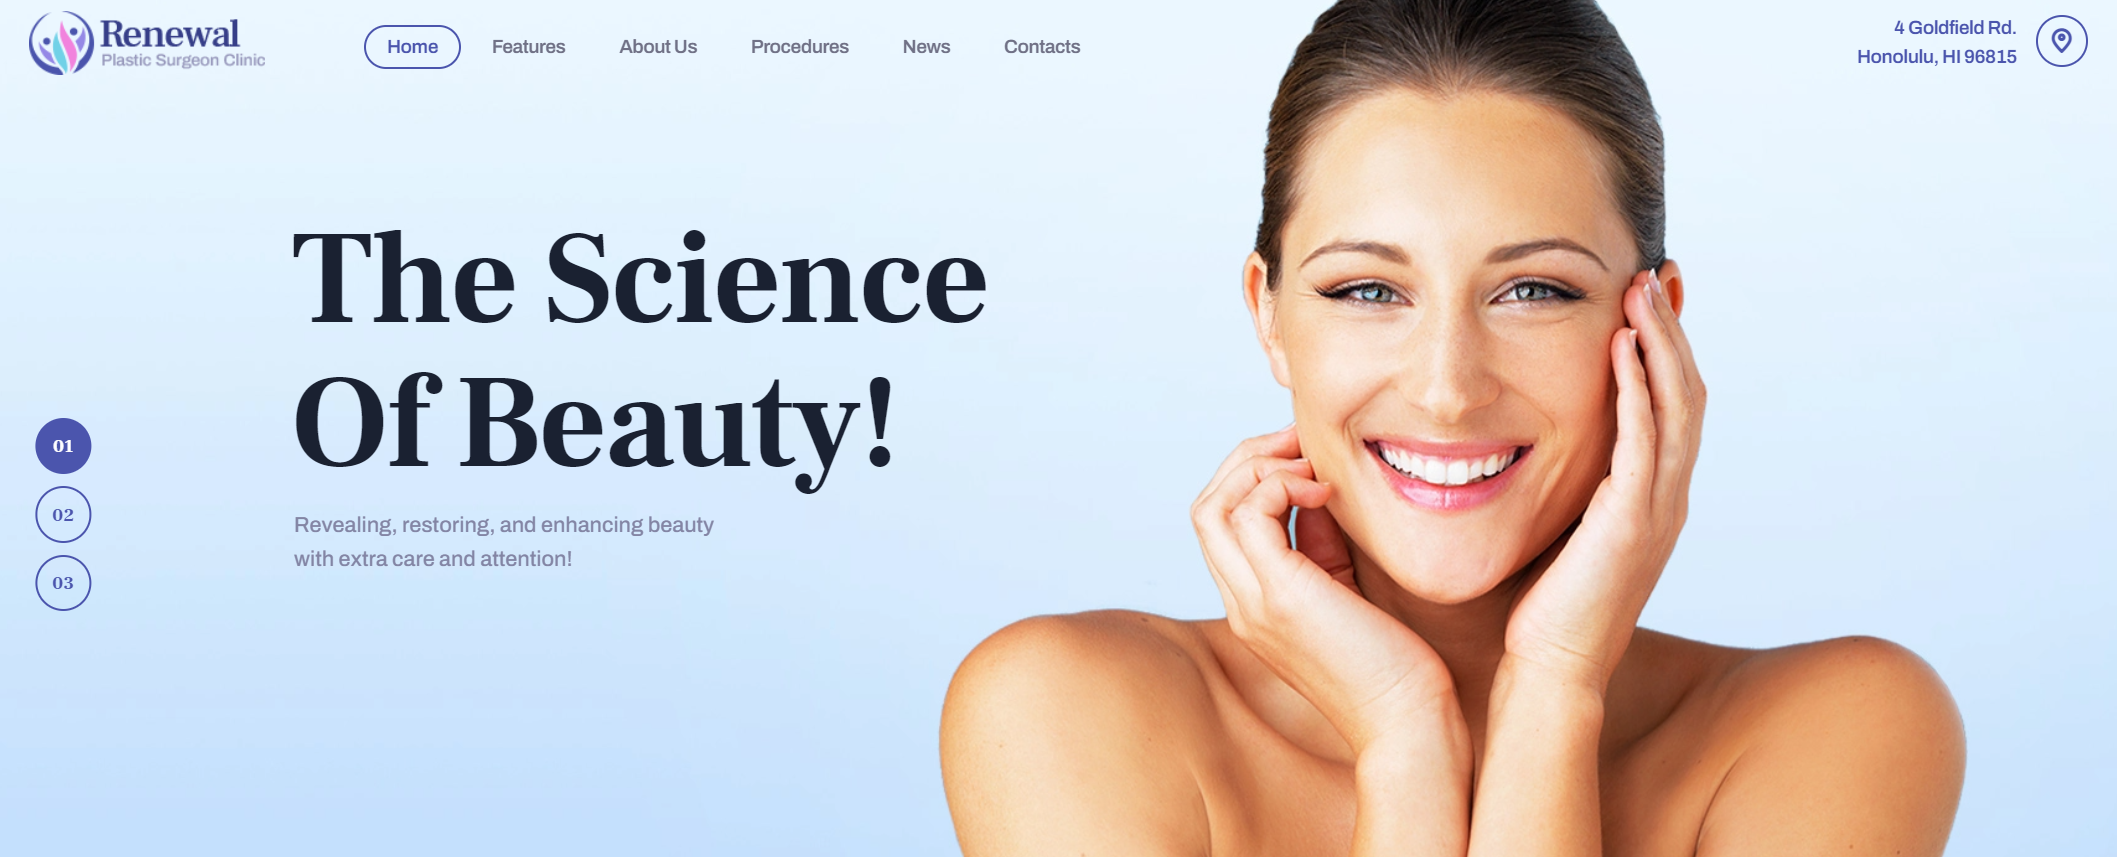 free download Renewal Plastic Surgery Clinic Medical WordPress Theme nulled